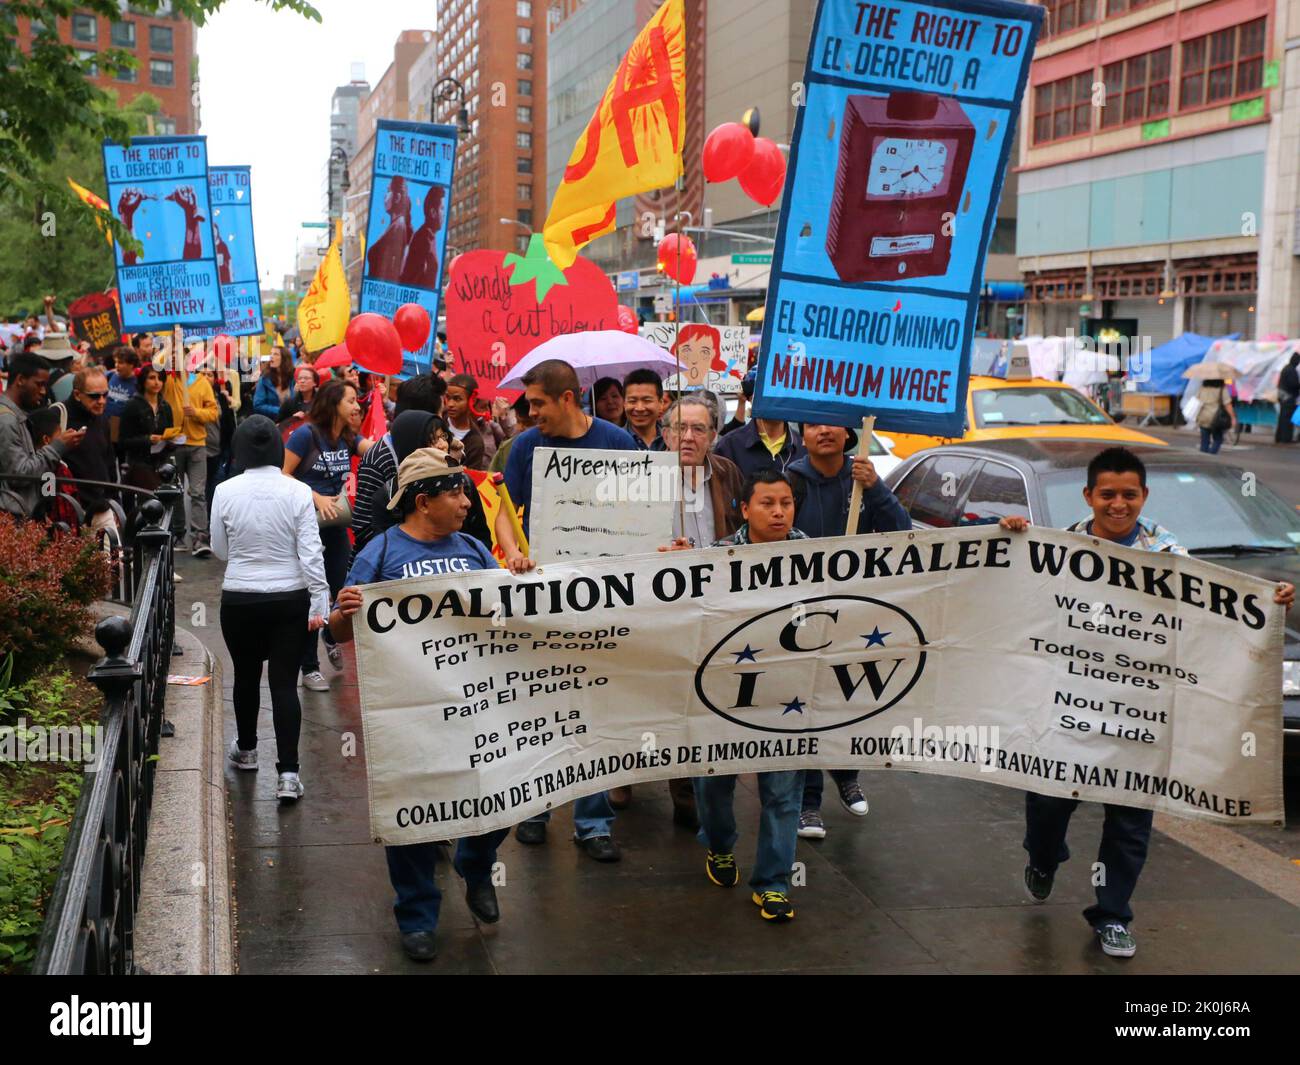 New York, May 18, 2013. Coalition of Immokalee Workers, and allies  March for Fair Food to bring awareness of ... see add'l info for full caption Stock Photo